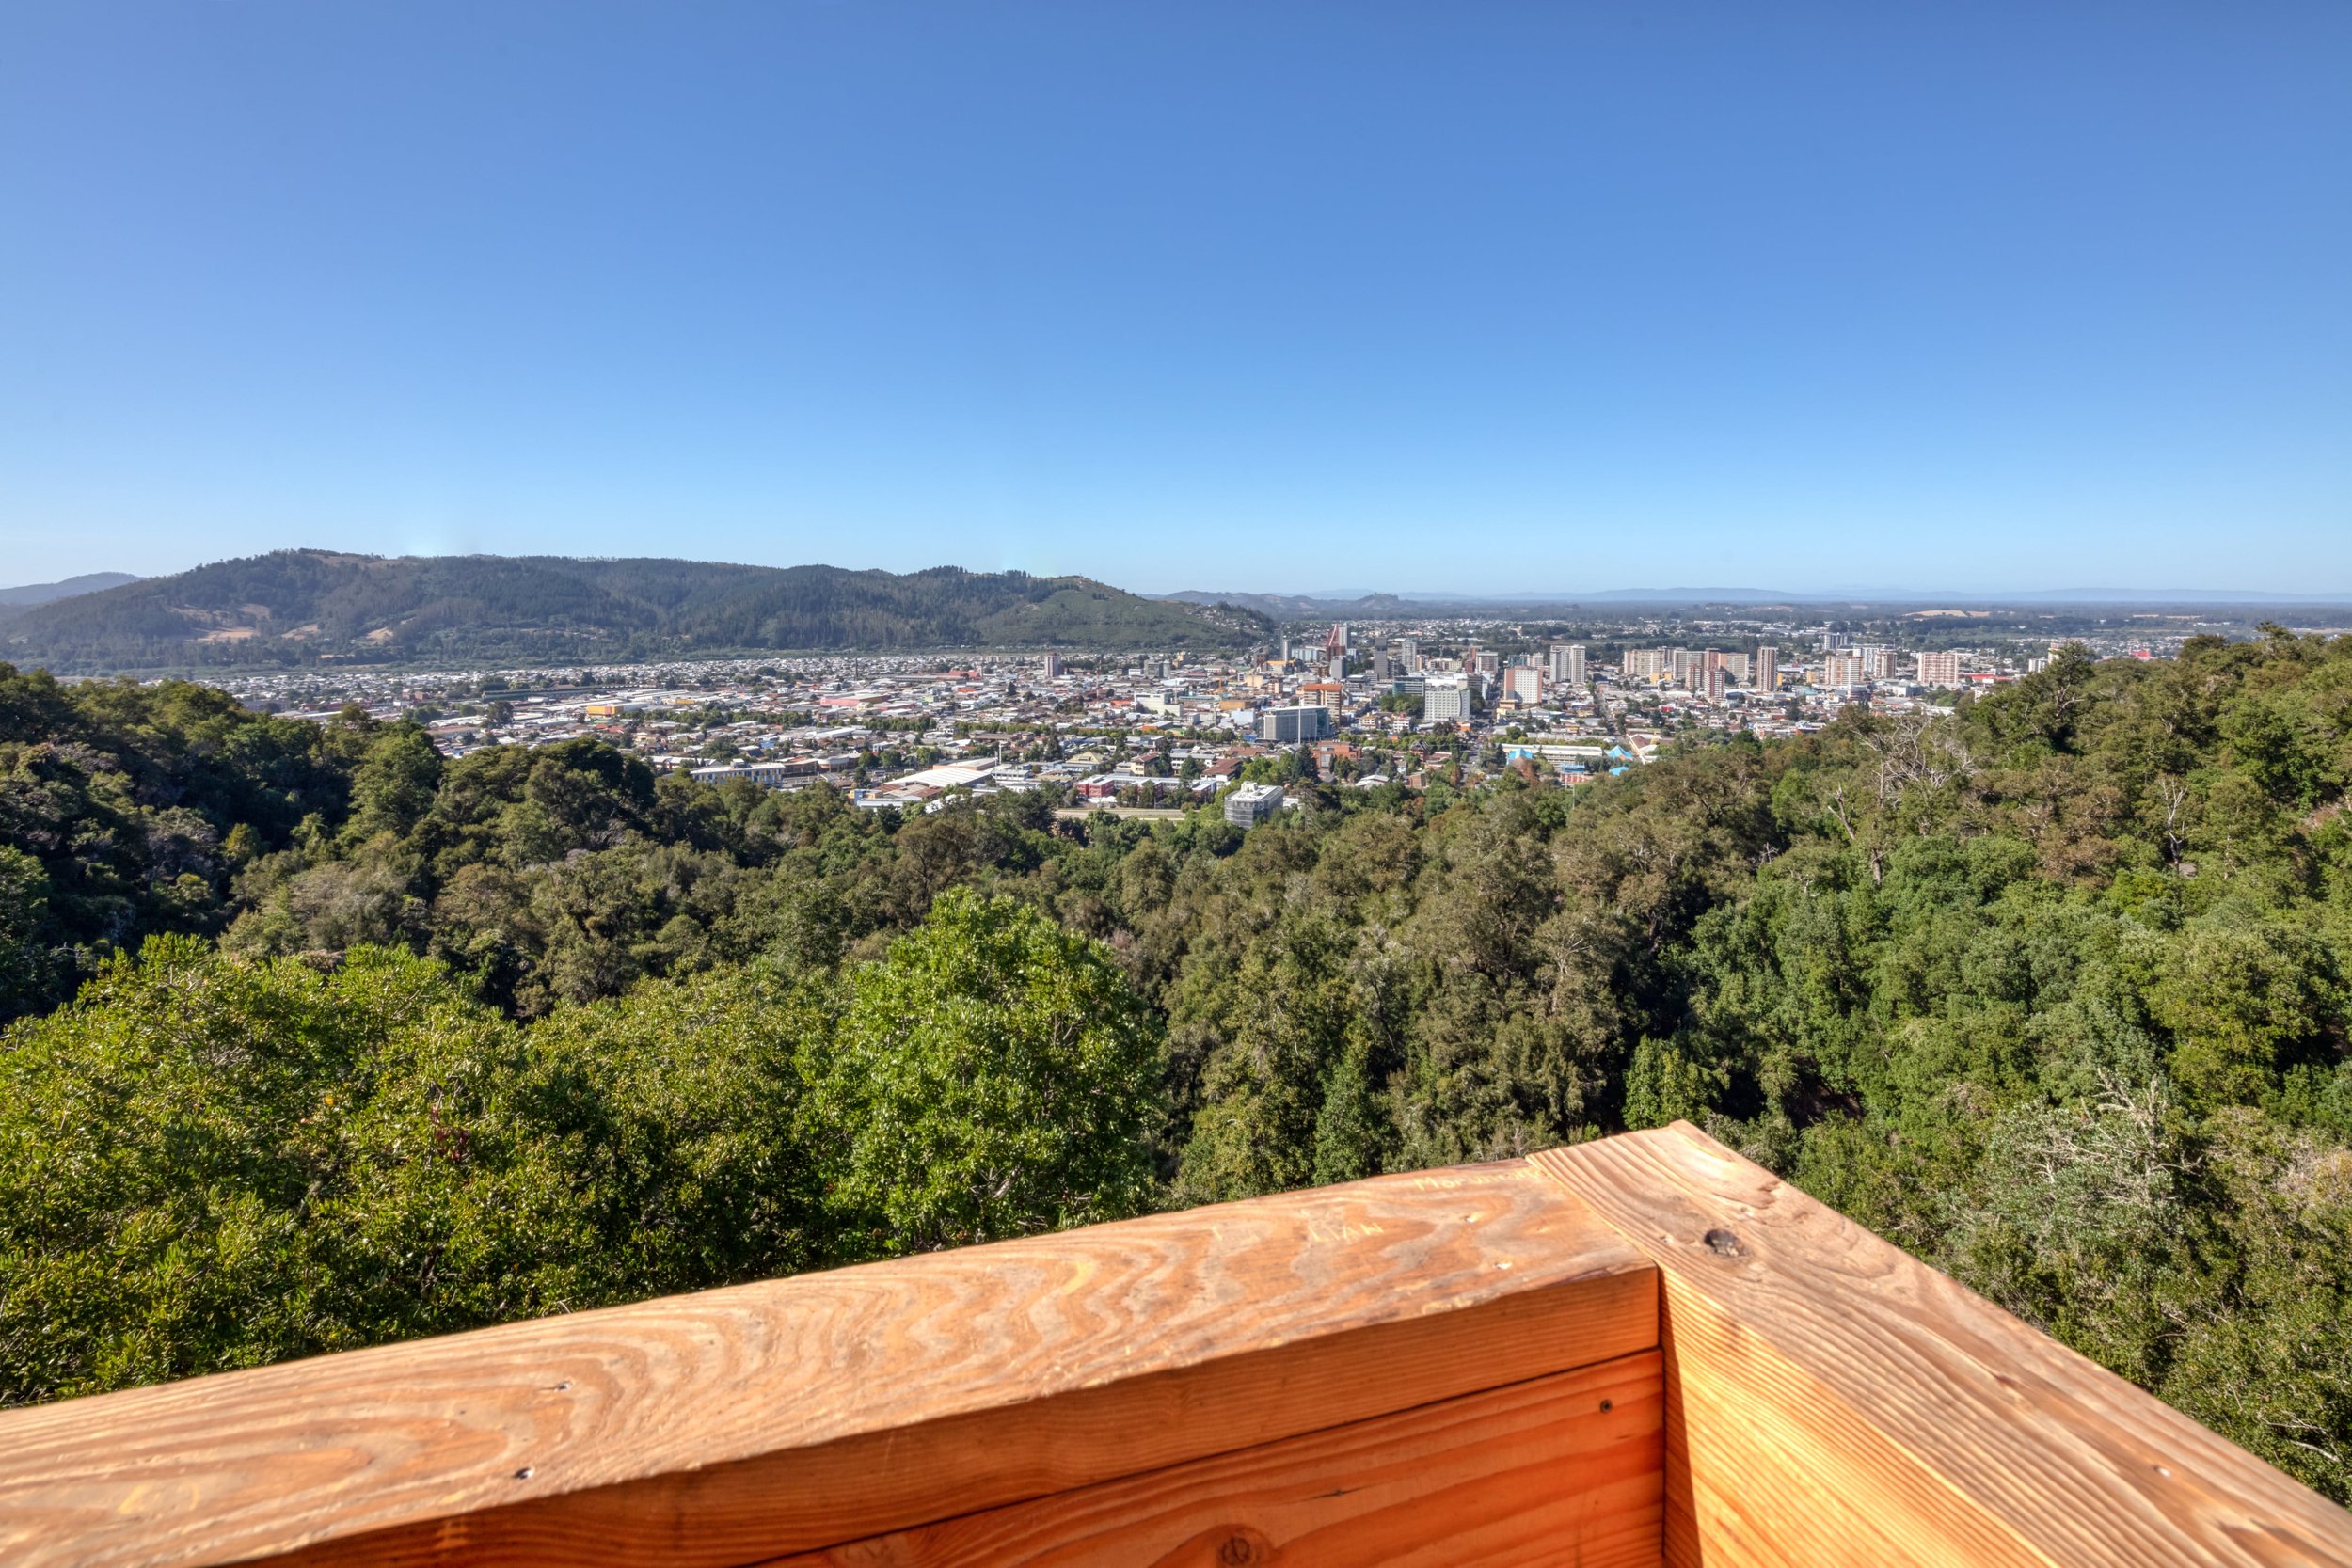 blog-chile-jaime-inostroza-lookout-temuco-nielol-hill-national-park-4-andrew-pielage-4338 × 2892.jpg